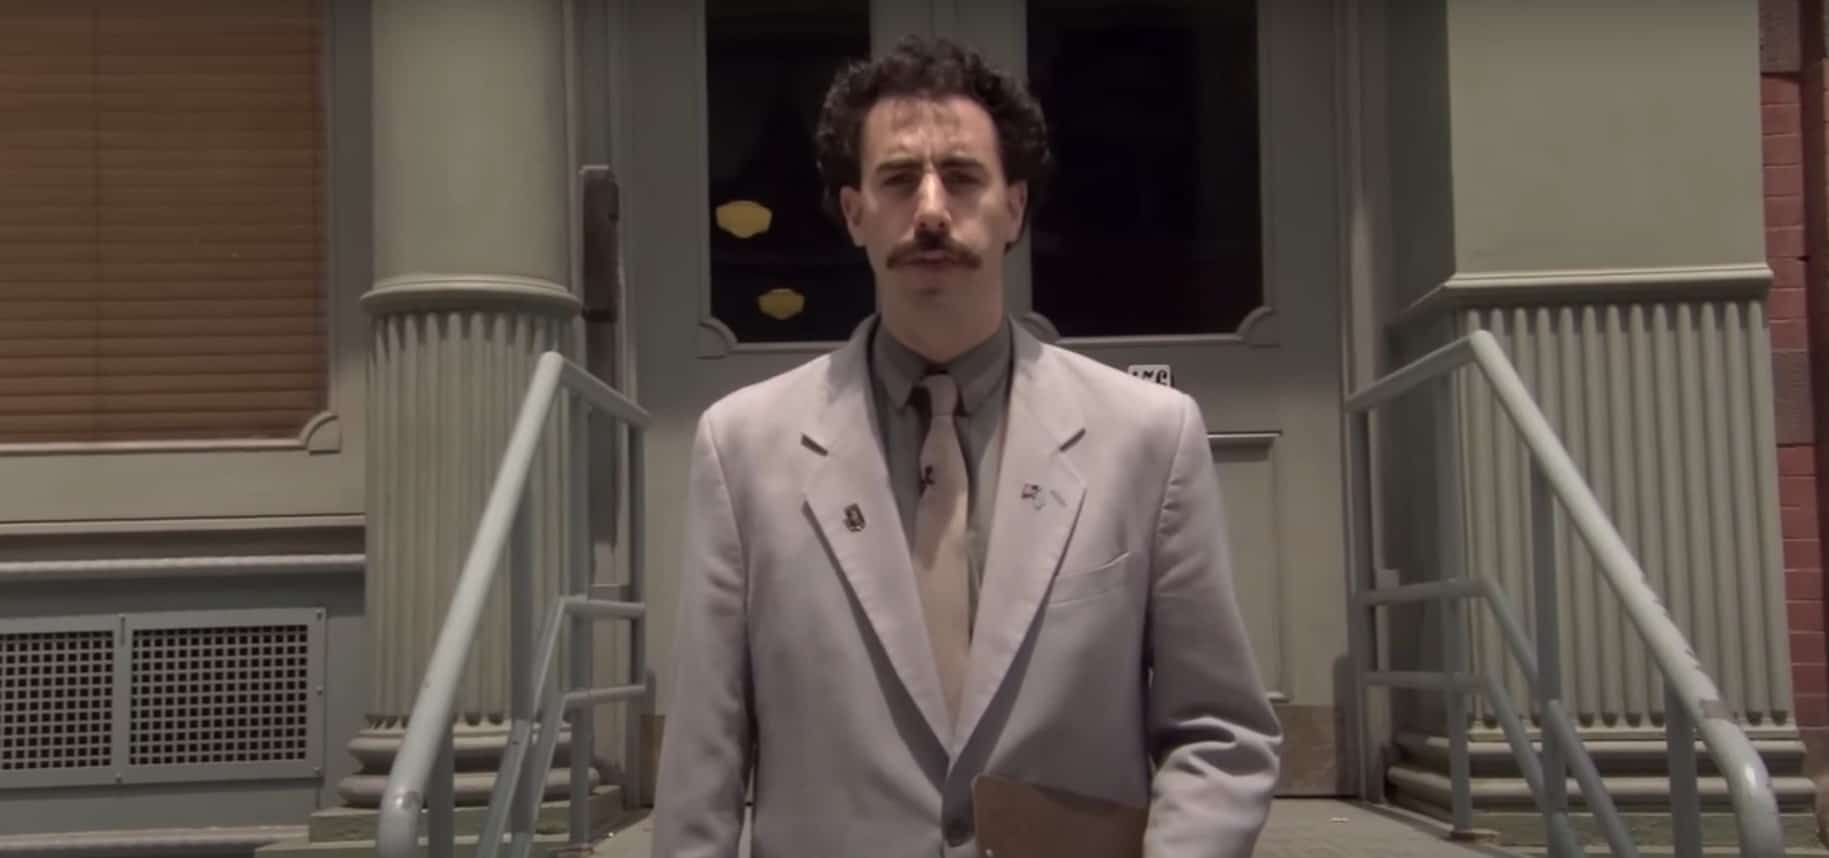 Is Borat Real Or Staged?